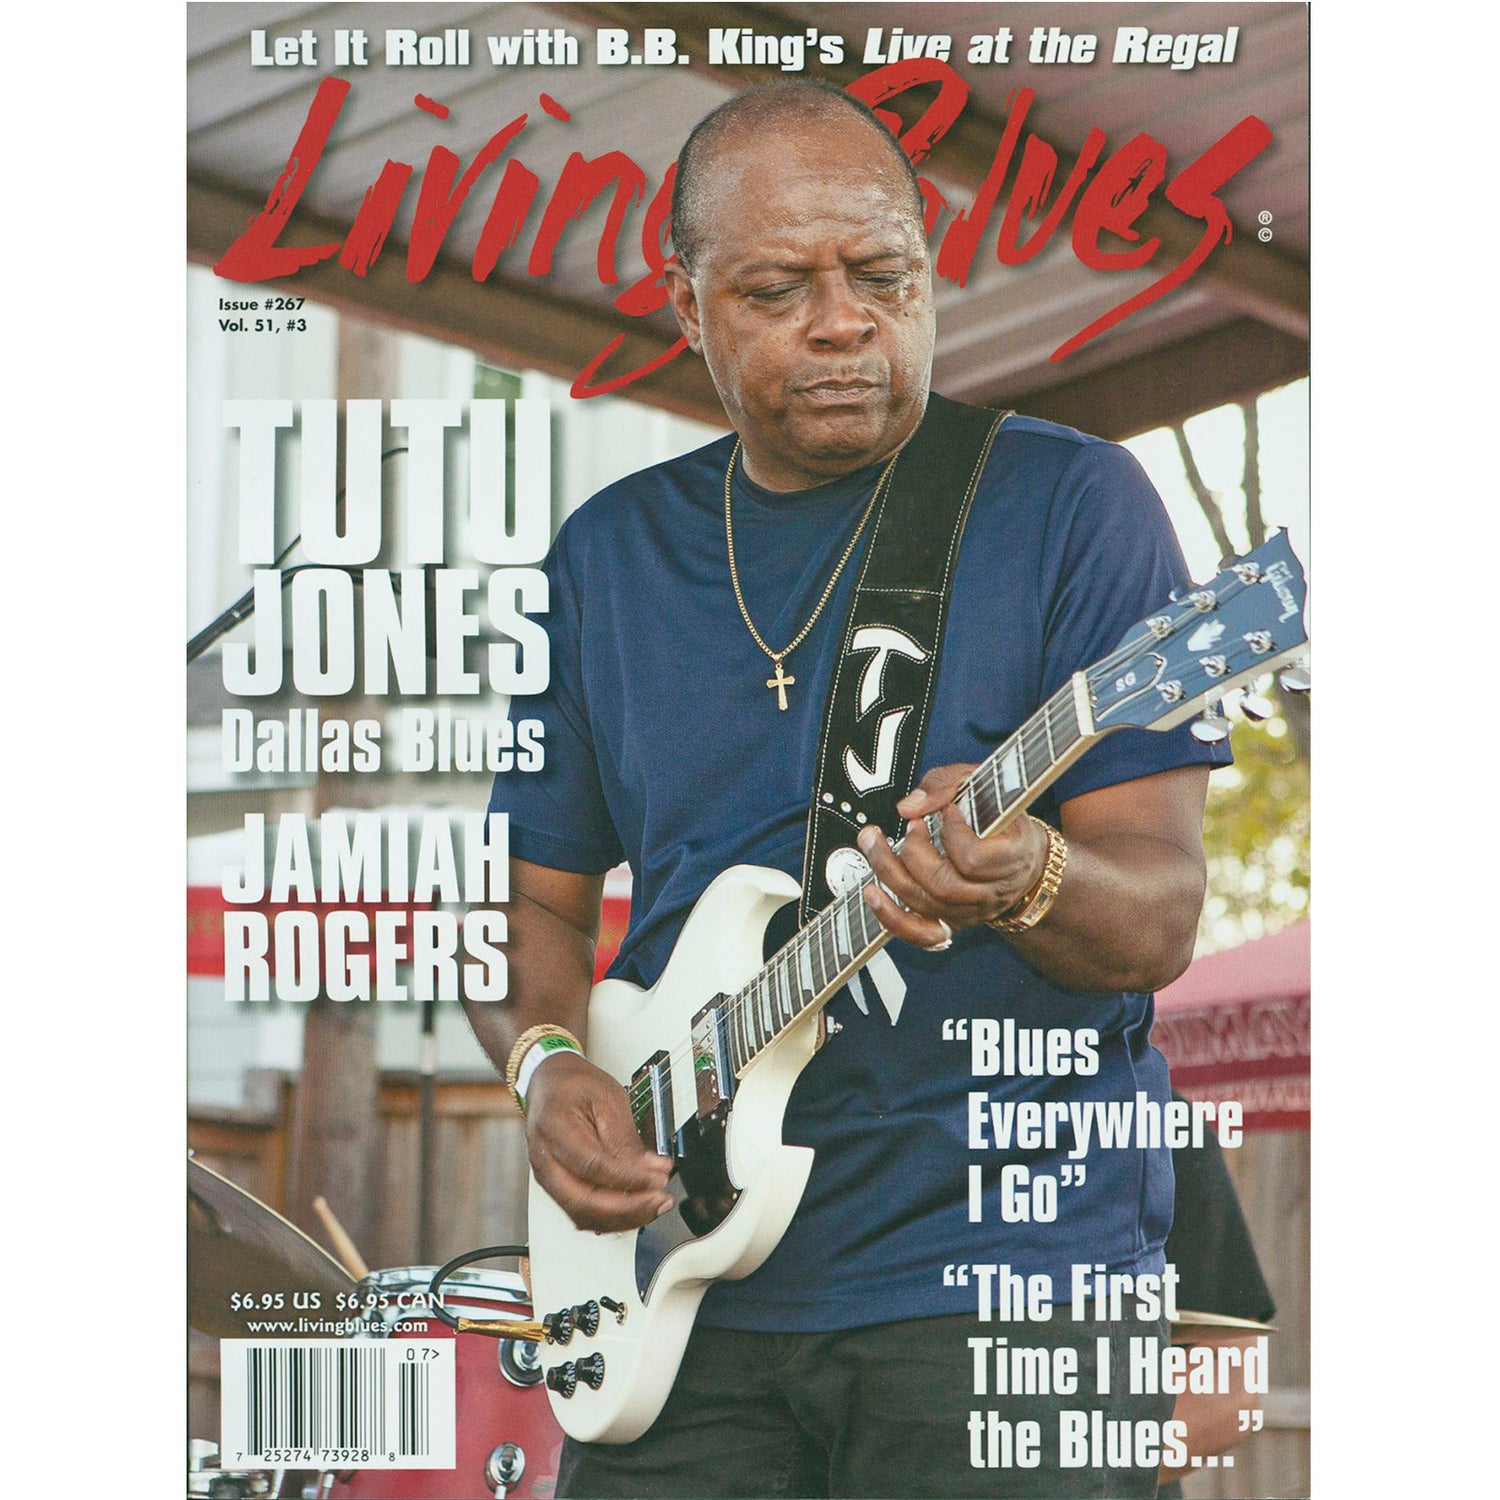 Image 1 of Living Blues July 2020 - Issue #267, Vol. 51, #3 - SKU# LB-202007 : Product Type Media : Elderly Instruments